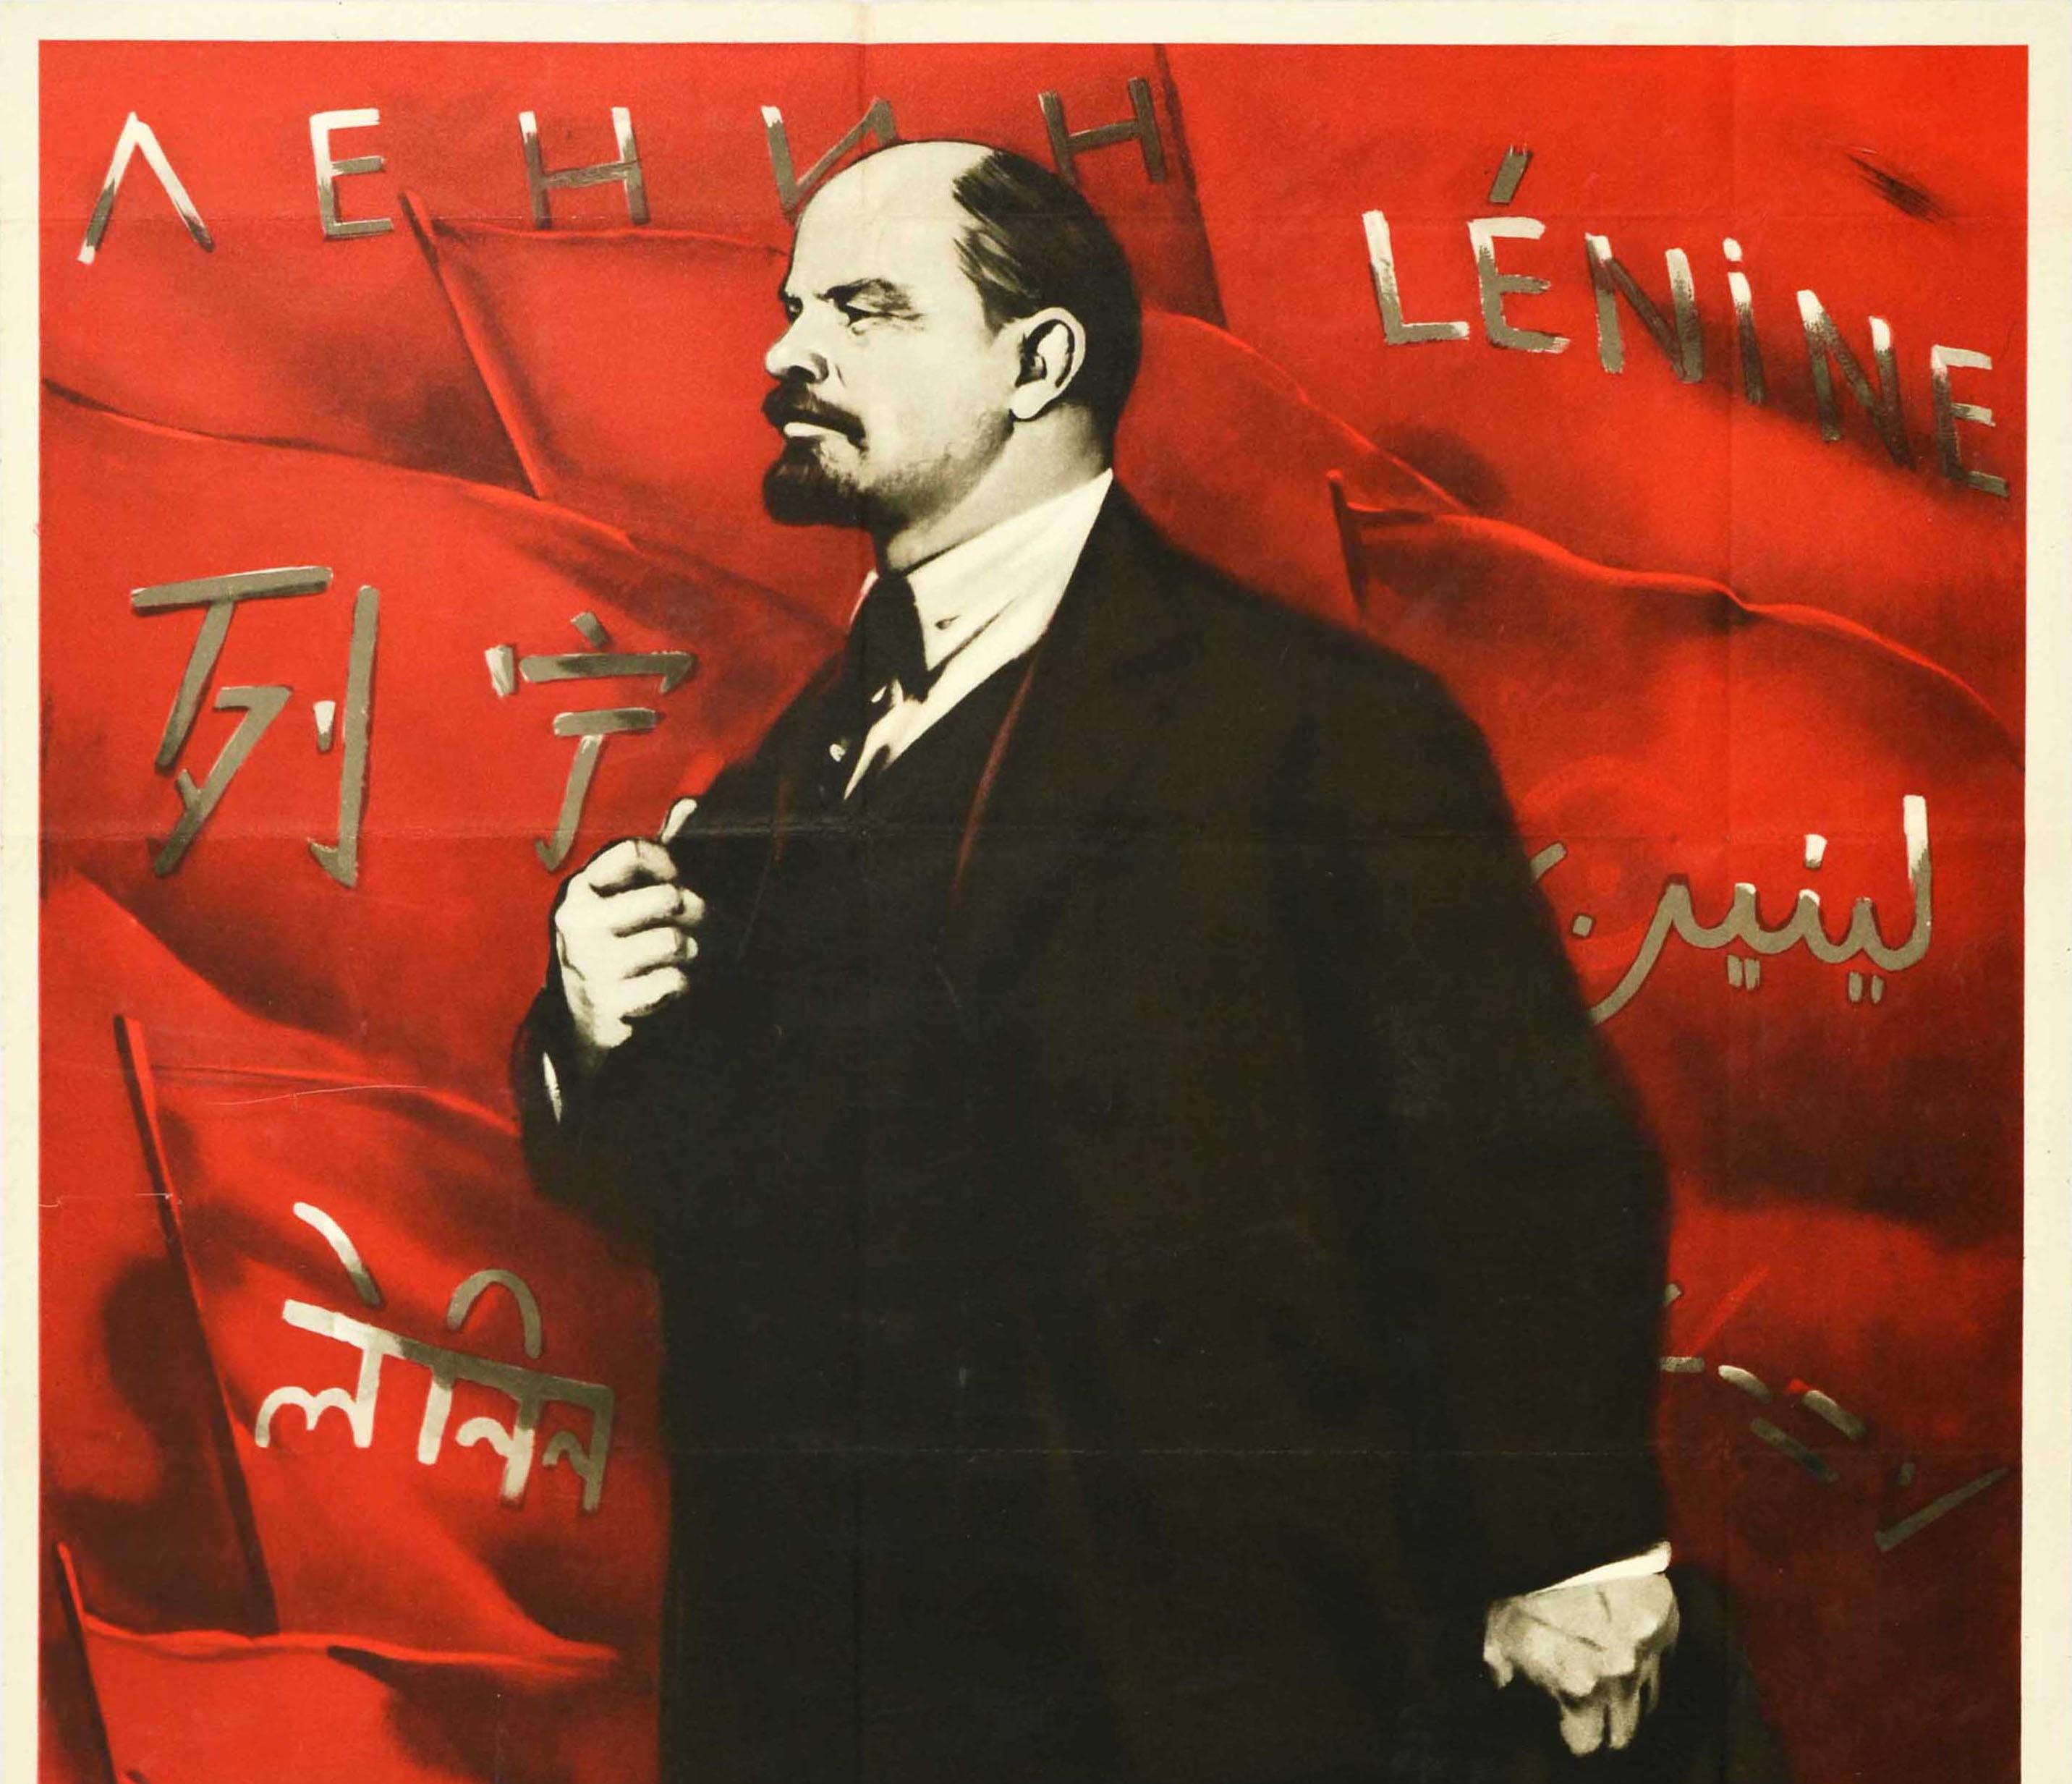 Original vintage Soviet propaganda poster - Lenin is the banner of Communism! / ????? ????? ??????????! - featuring an image of Lenin in front of red flags with his name in different languages on them, the slogan in bold white below. Good condition,